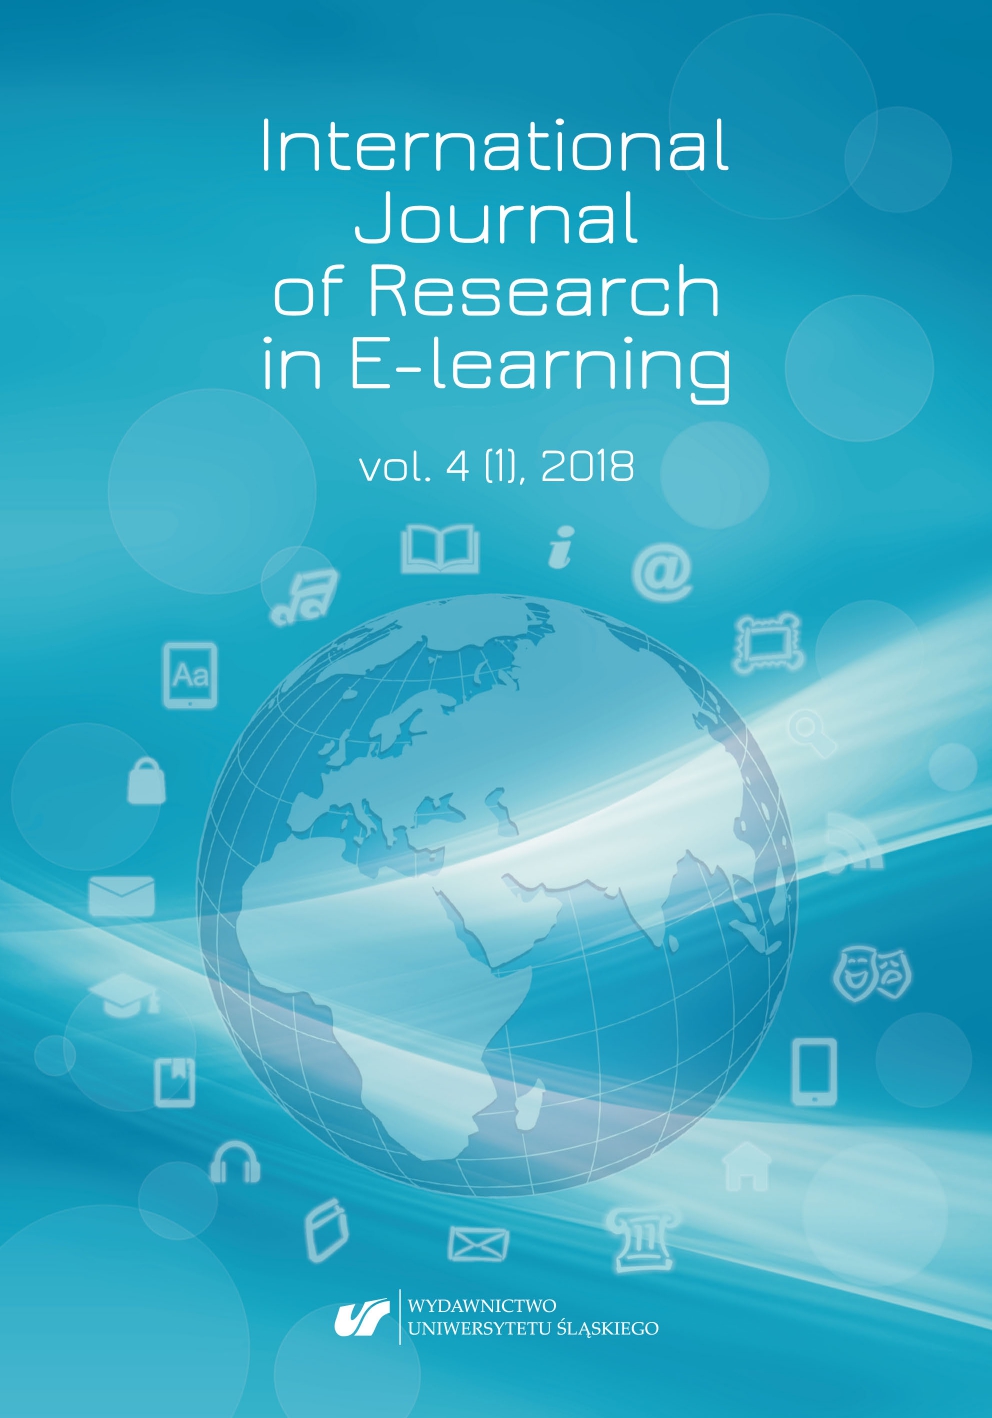 Internationalisation of Education and Competences Approach in the Digital World – Experts’ Opinions (A Round Table Debate Hosted by IRNet Project Researchers) Cover Image